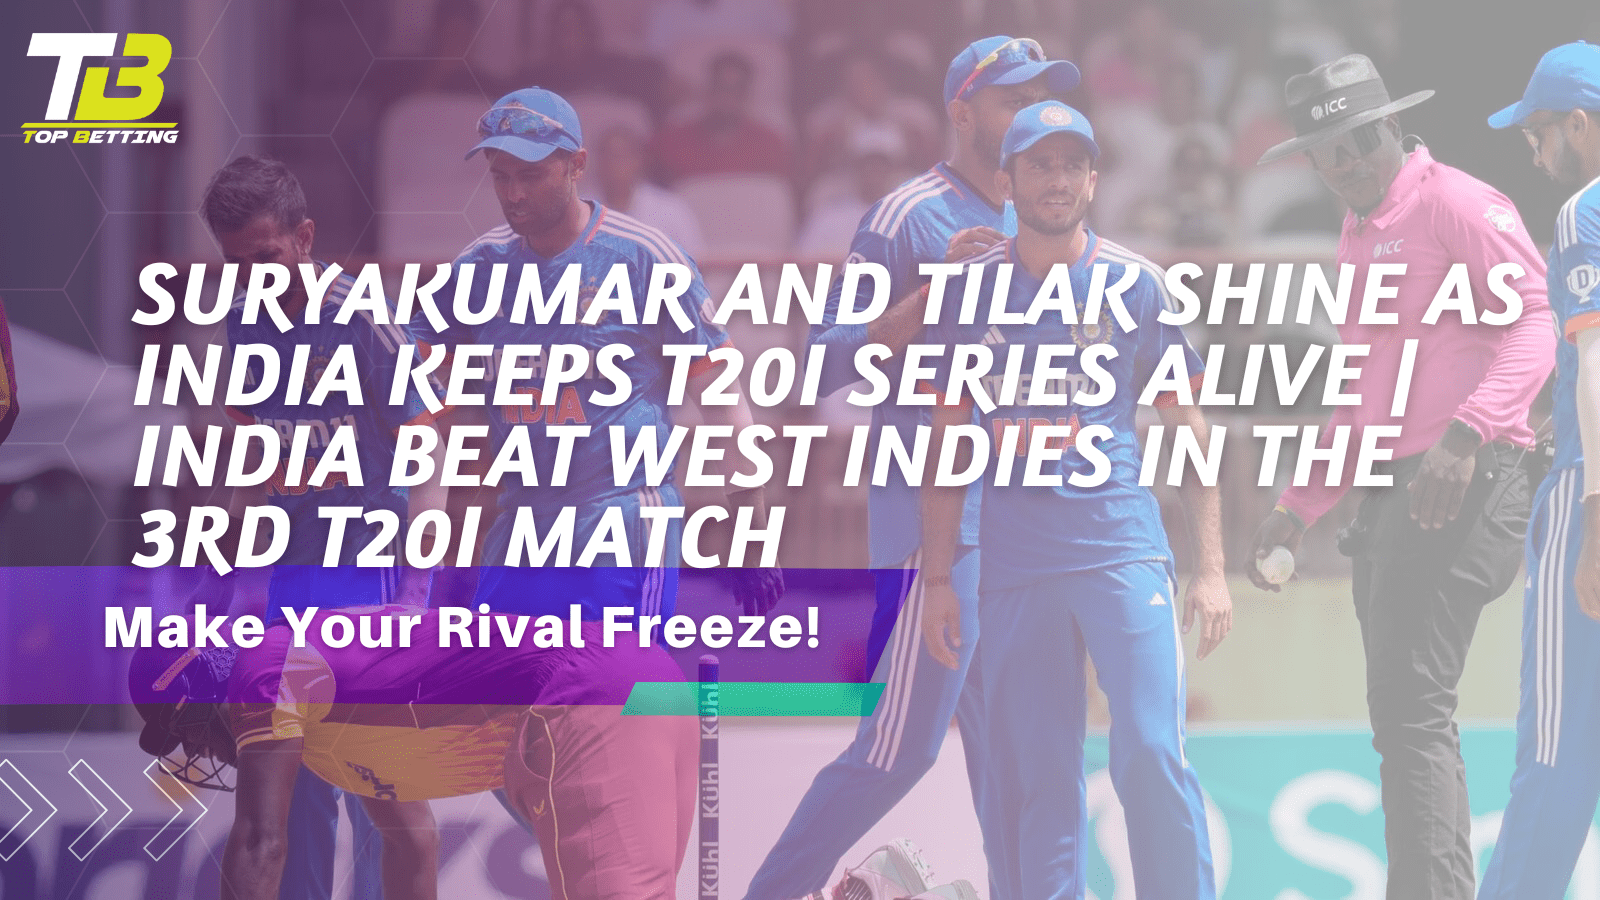 Suryakumar and Tilak Shine as India Keeps T20I Series Alive | India beat West Indies in the 3rd T20I Match